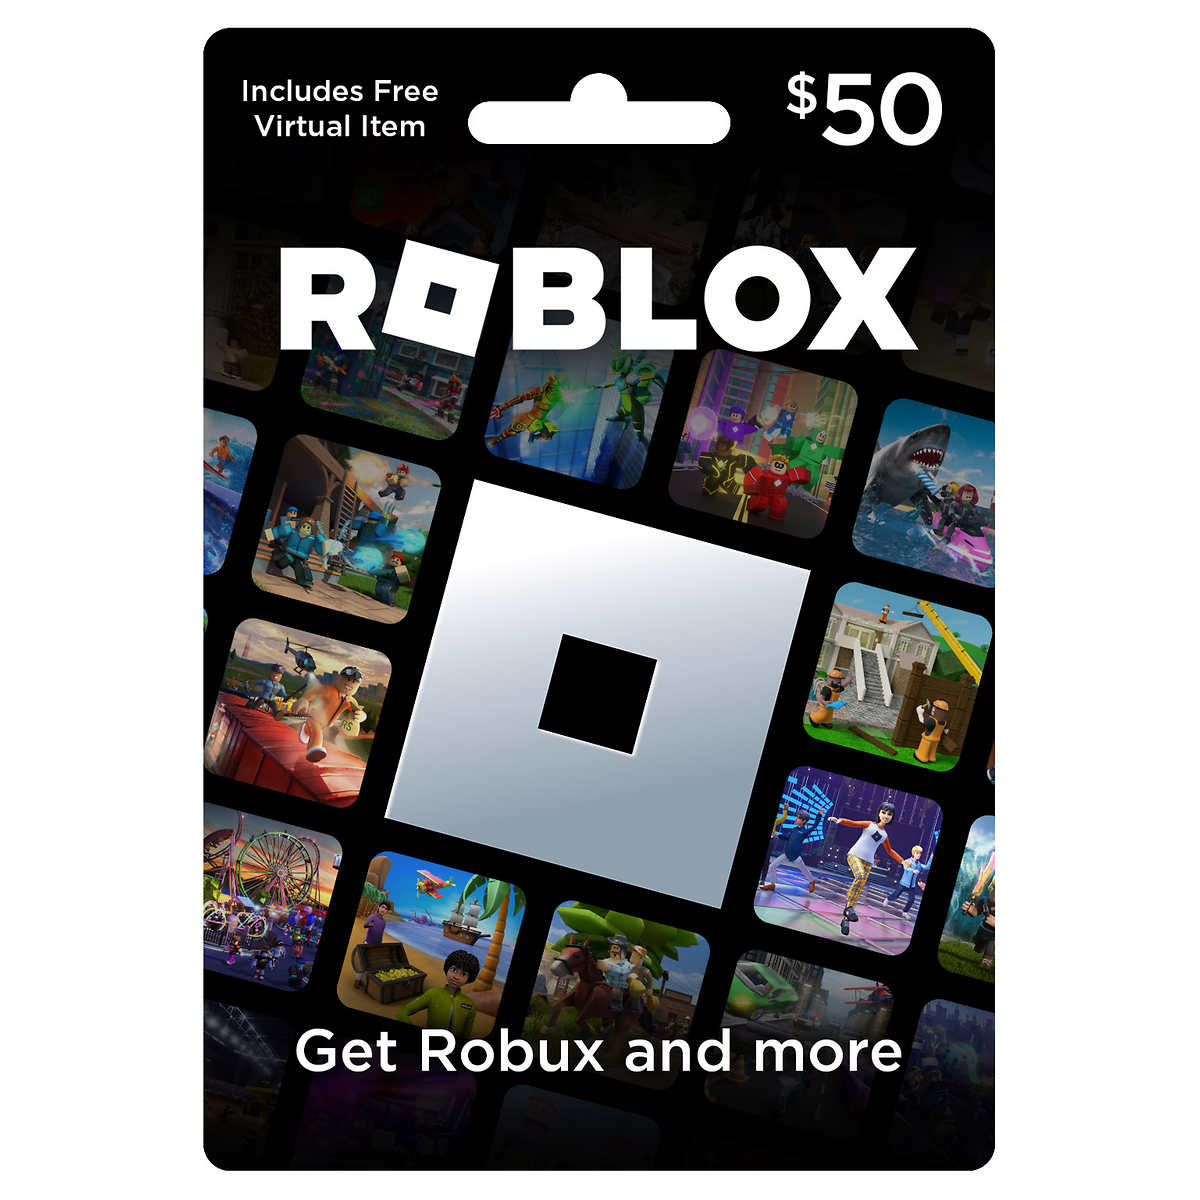 Customer Service Roblox Email